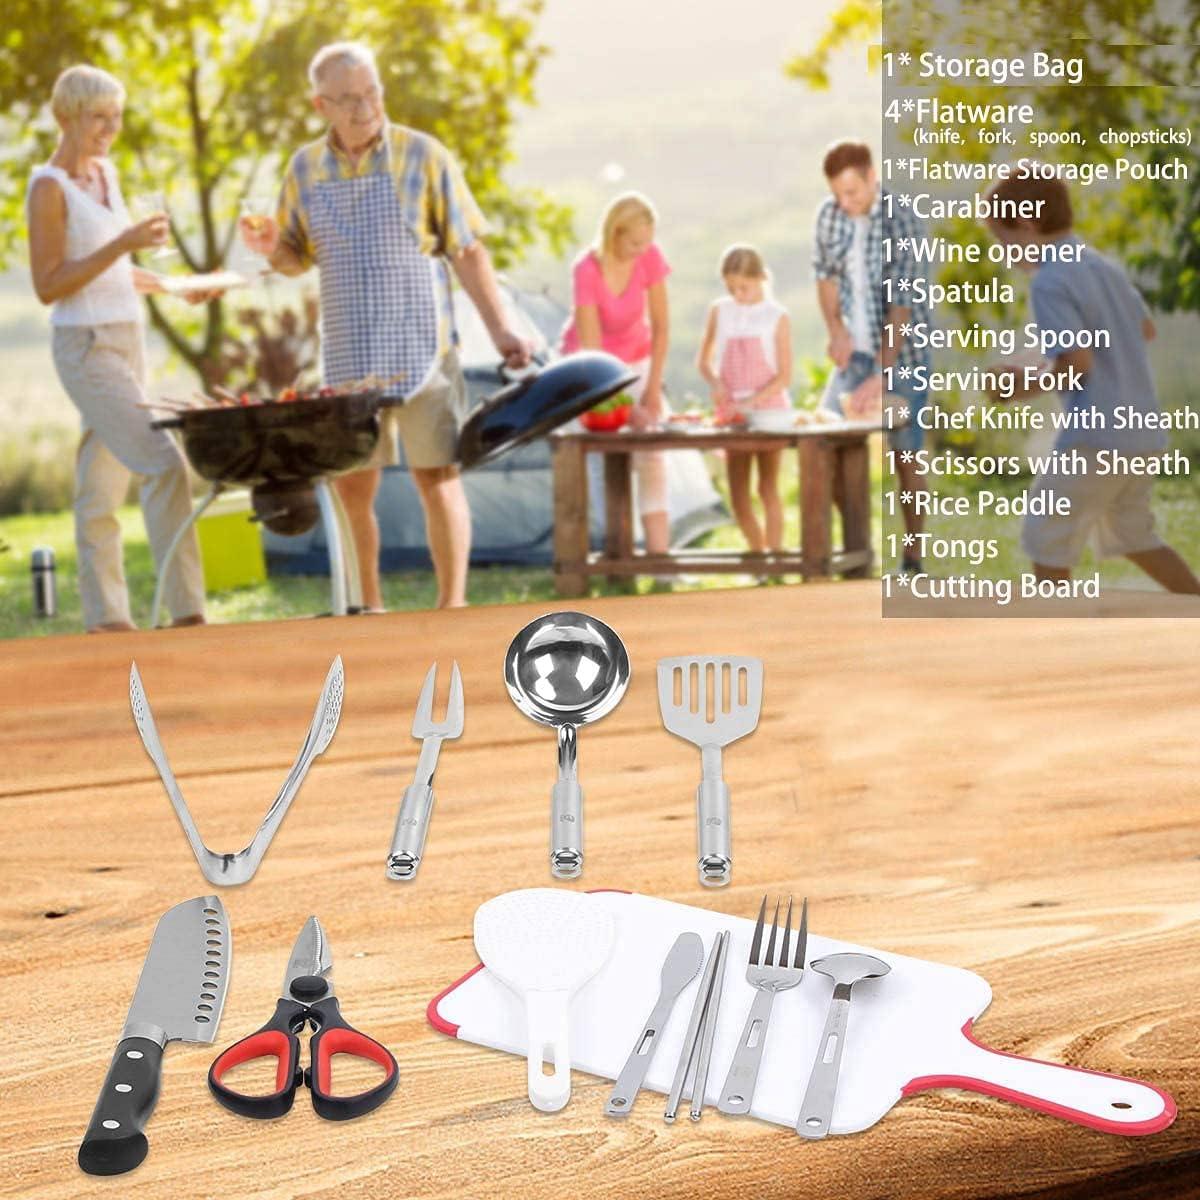 Grill Utensil Holder Personalized - Outdoor Grill Organizer